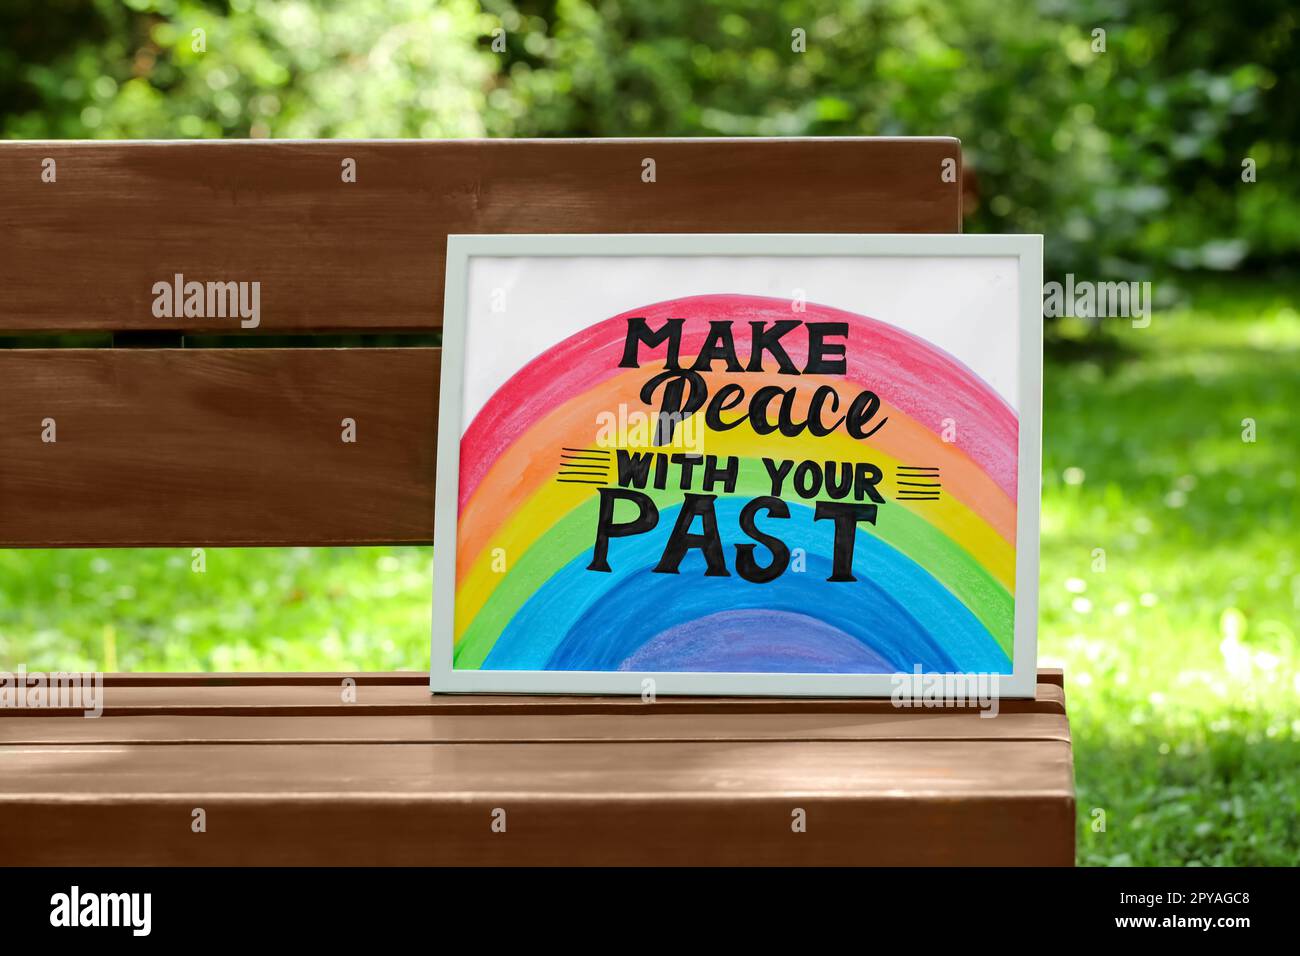 Phrase Make Peace With Your Past written on poster outdoors Stock Photo